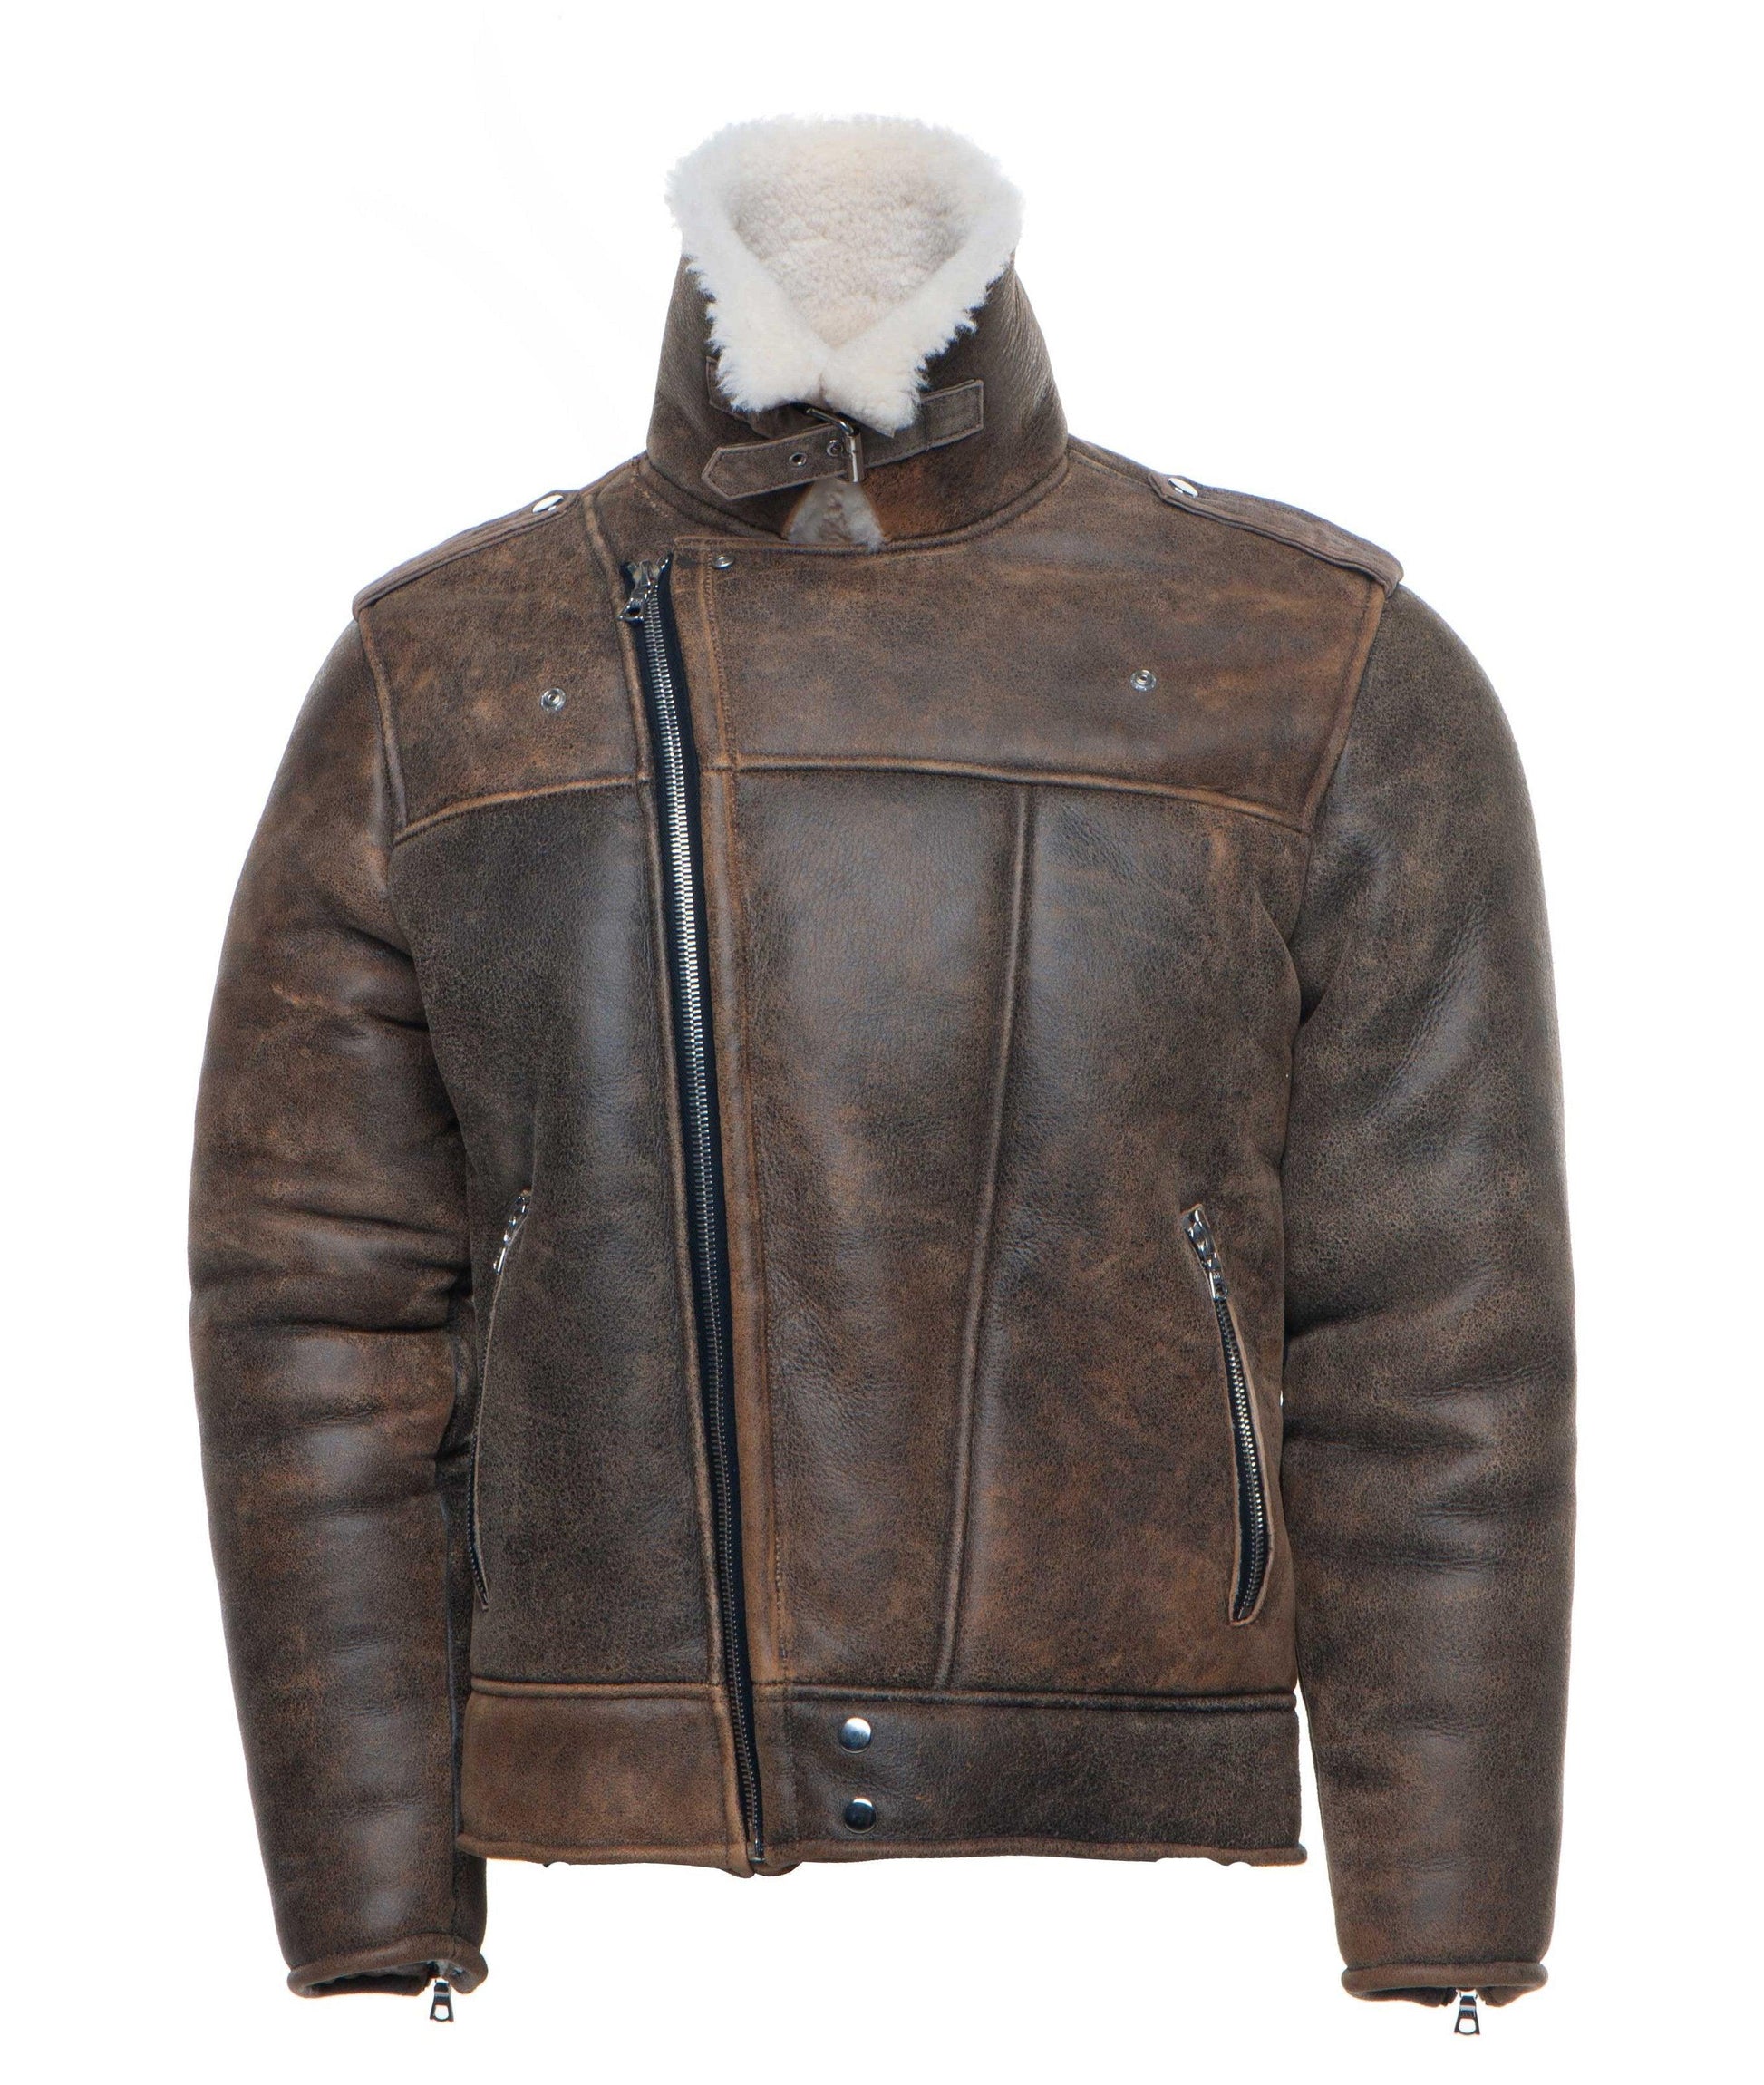 Distressed Biker bomber shearling jacket with notch lapels - Leather Loom